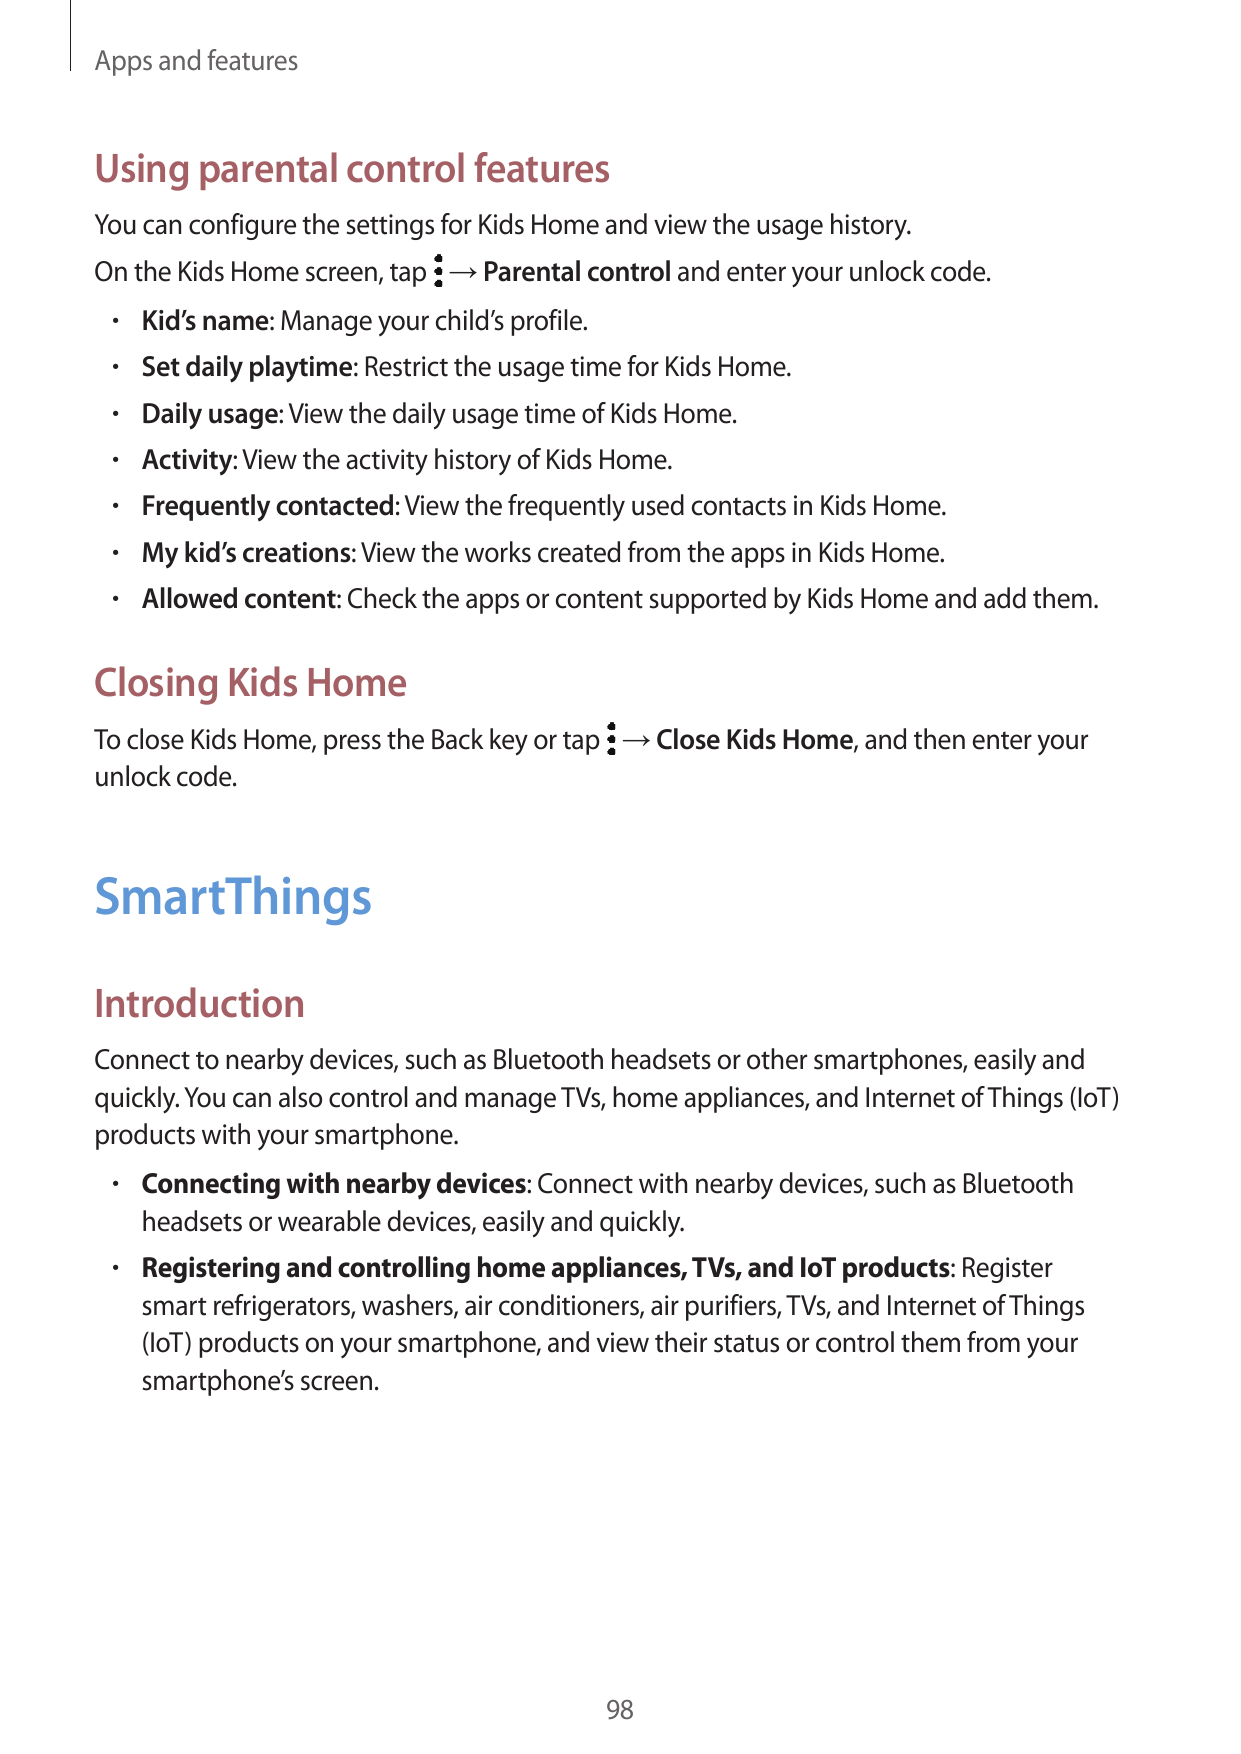 Apps and featuresUsing parental control featuresYou can configure the settings for Kids Home and view the usage history.On the K